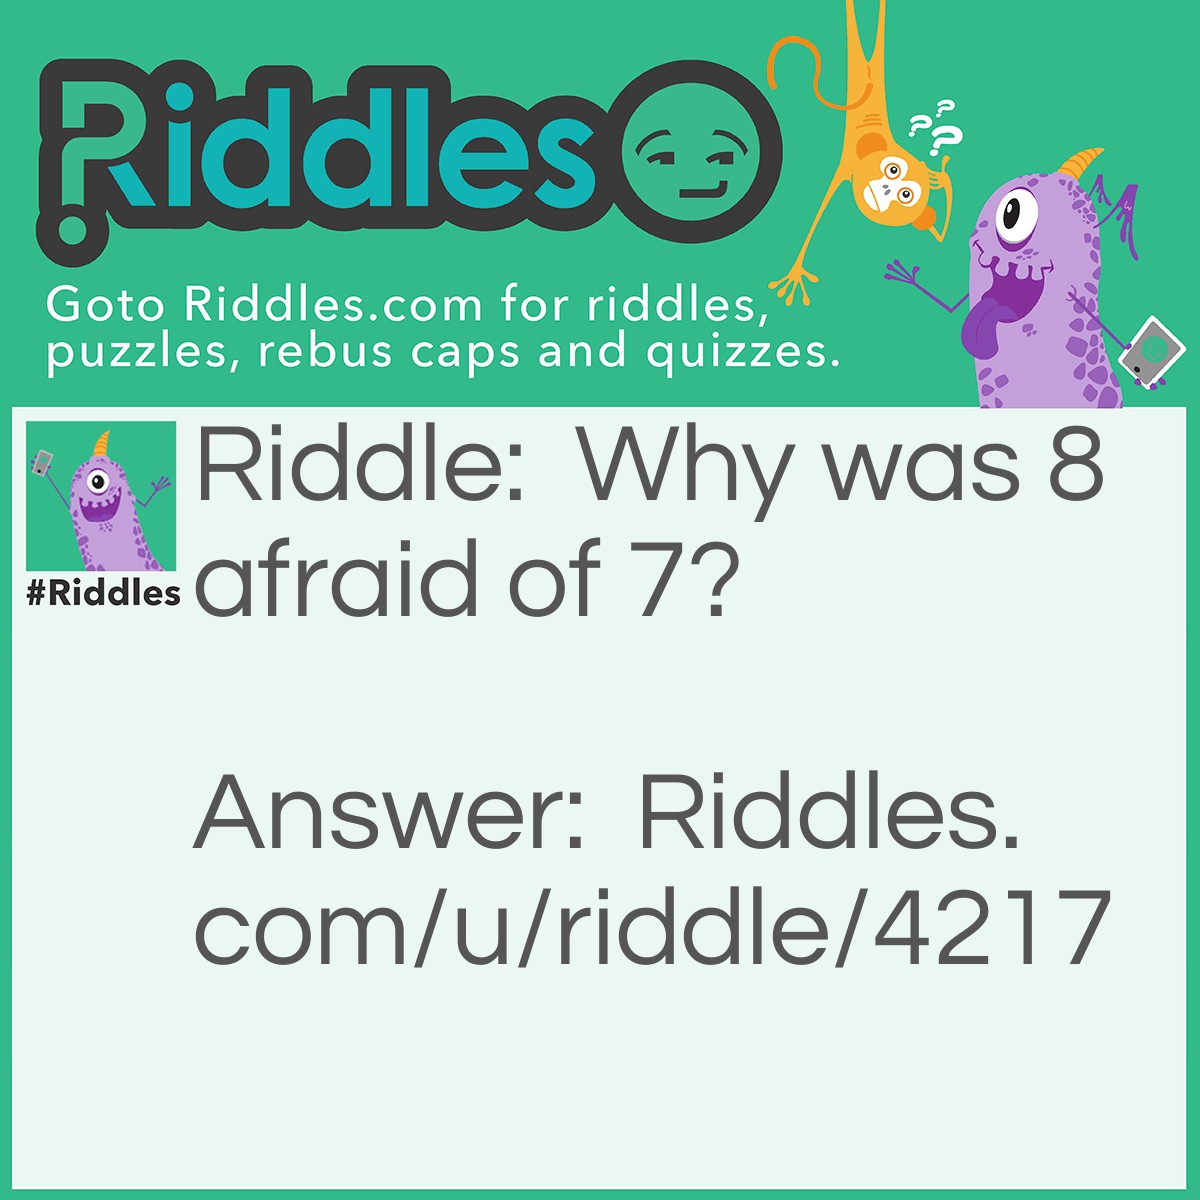 Riddle: Why was 8 afraid of 7? Answer: Because 7, 8, 9.